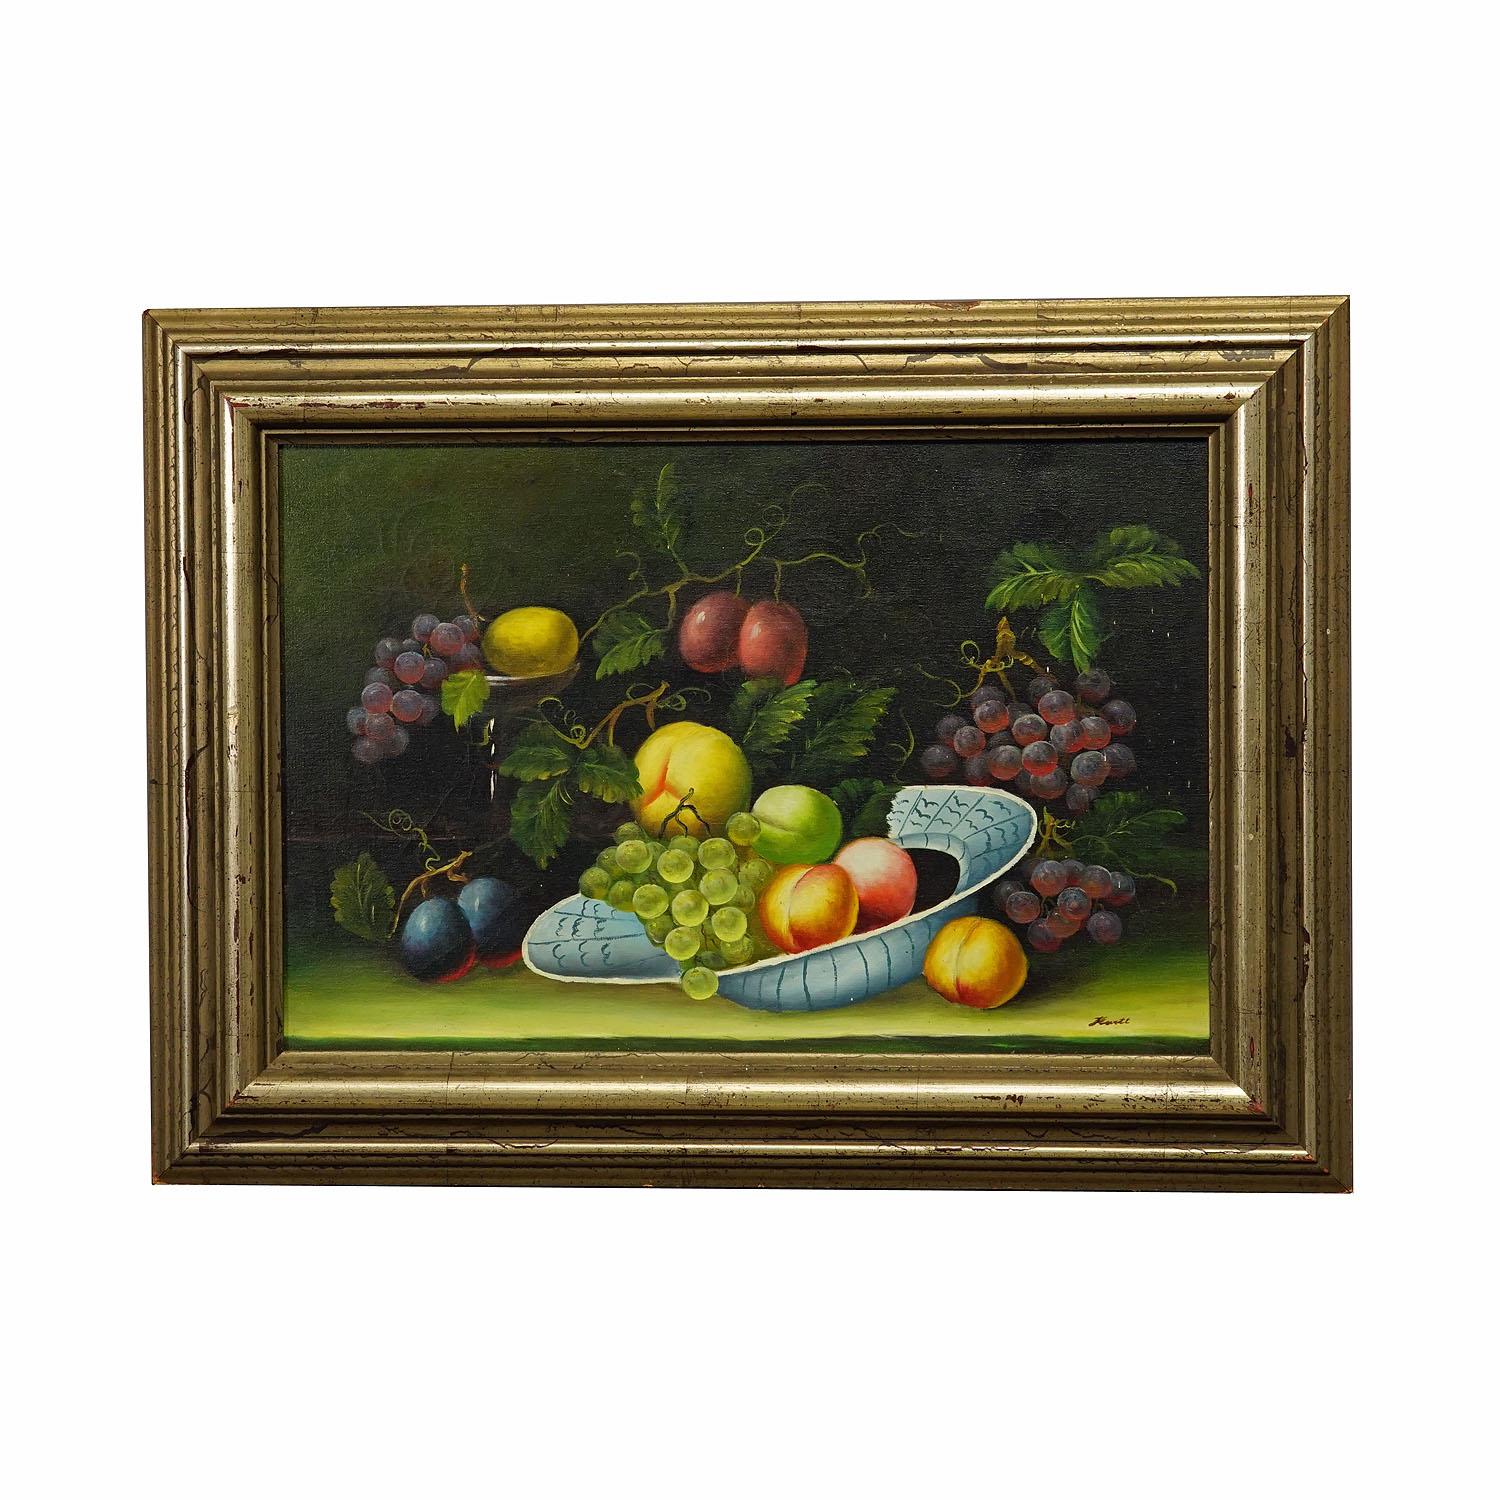 Still Life with Fruits, oil painting on canvas, Germany 1950s

An impressive Biedermeier style still life painting depicting diverse fruits like plums, grapes or peaches. Painted in oil on canvas with pastell colors and framed with a gilded wooden